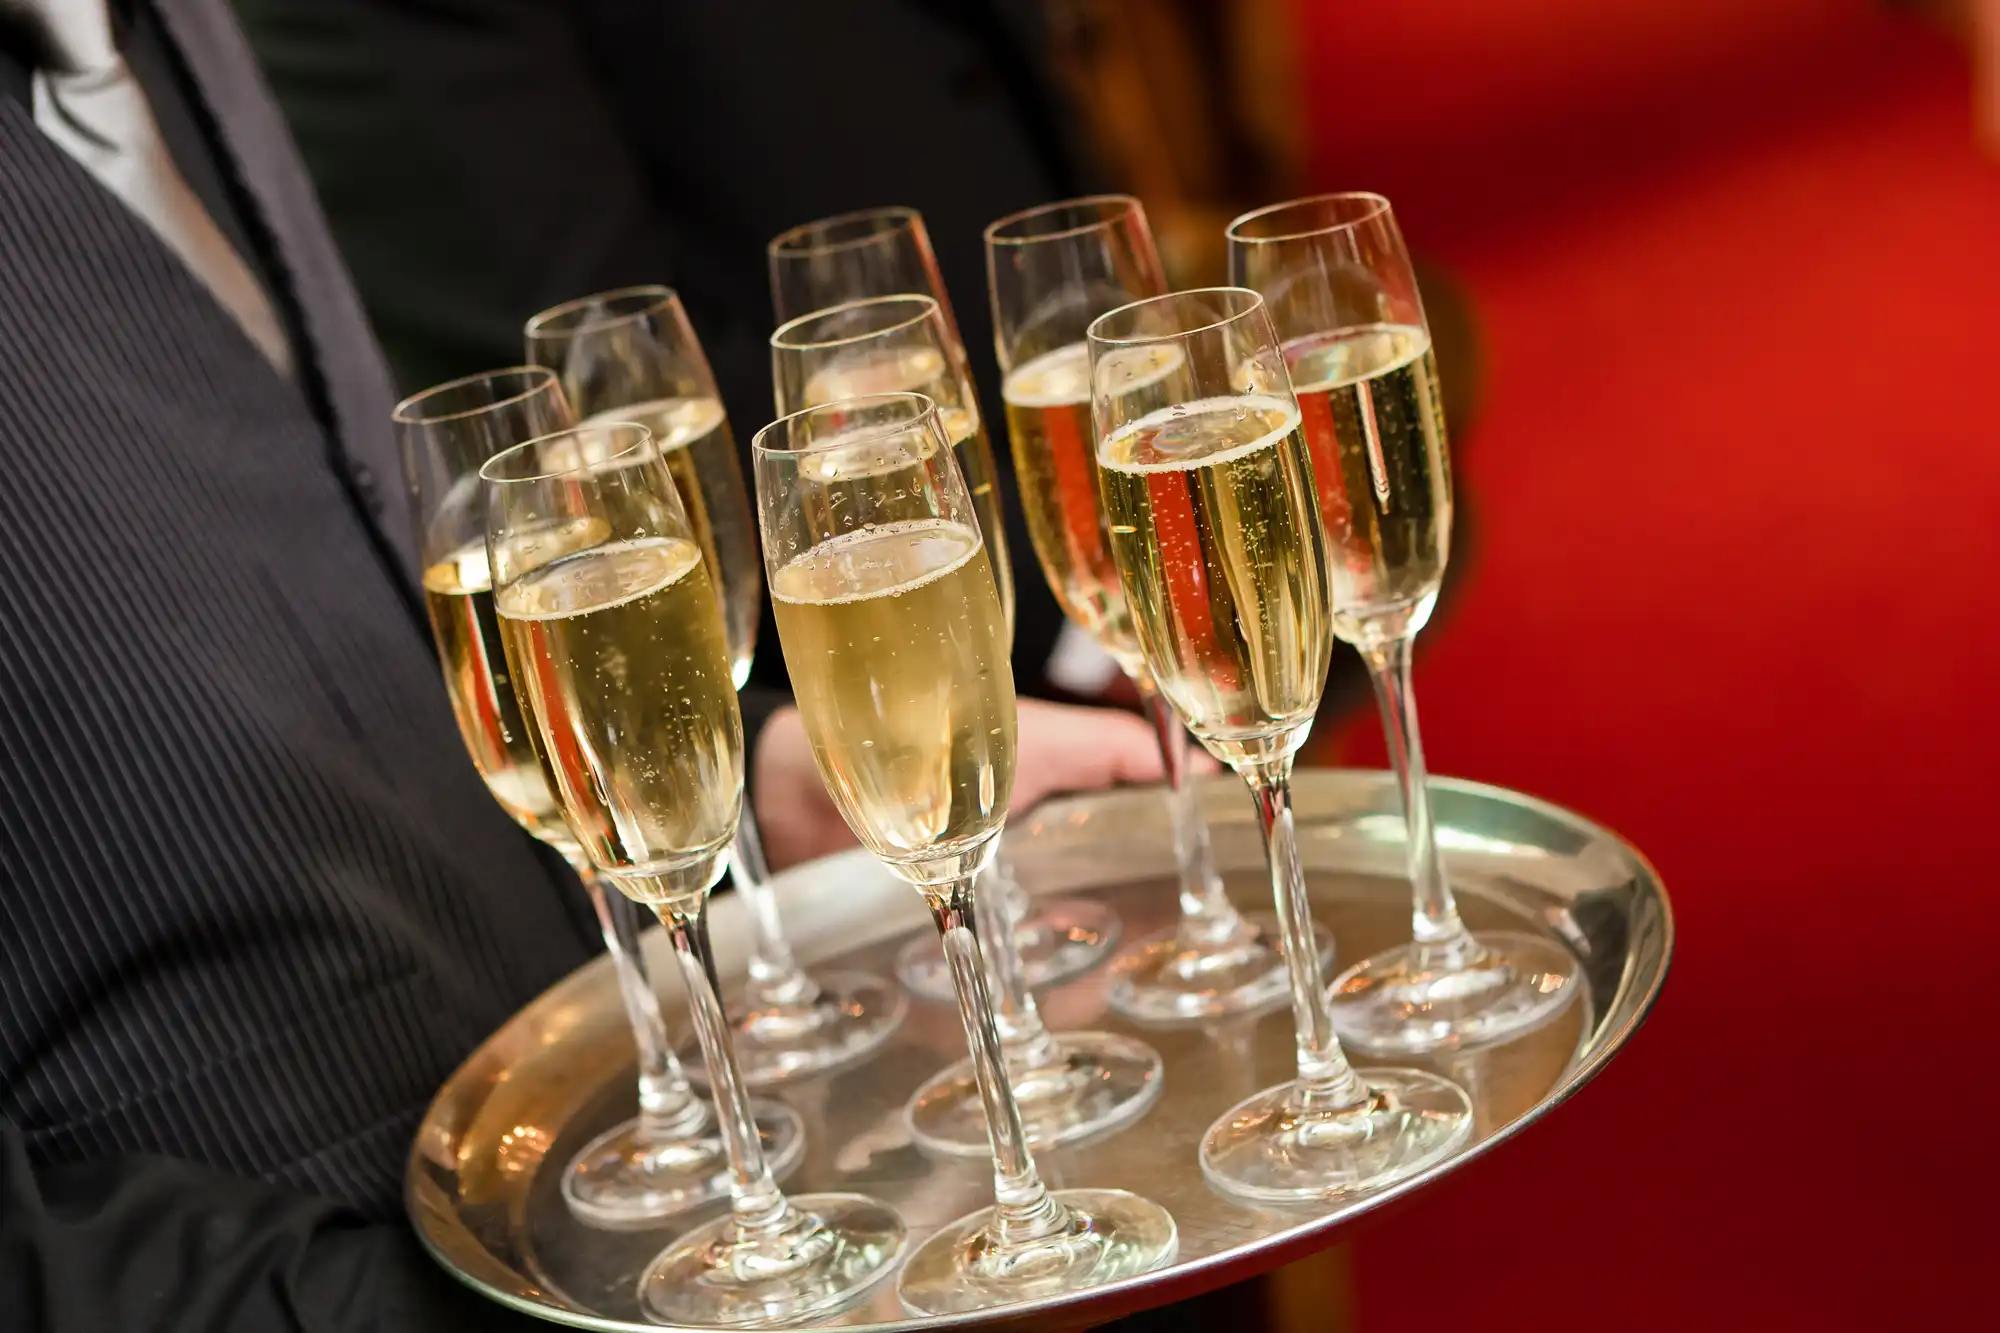 A server holding a tray of champagne glasses at a formal event with a red carpet background.